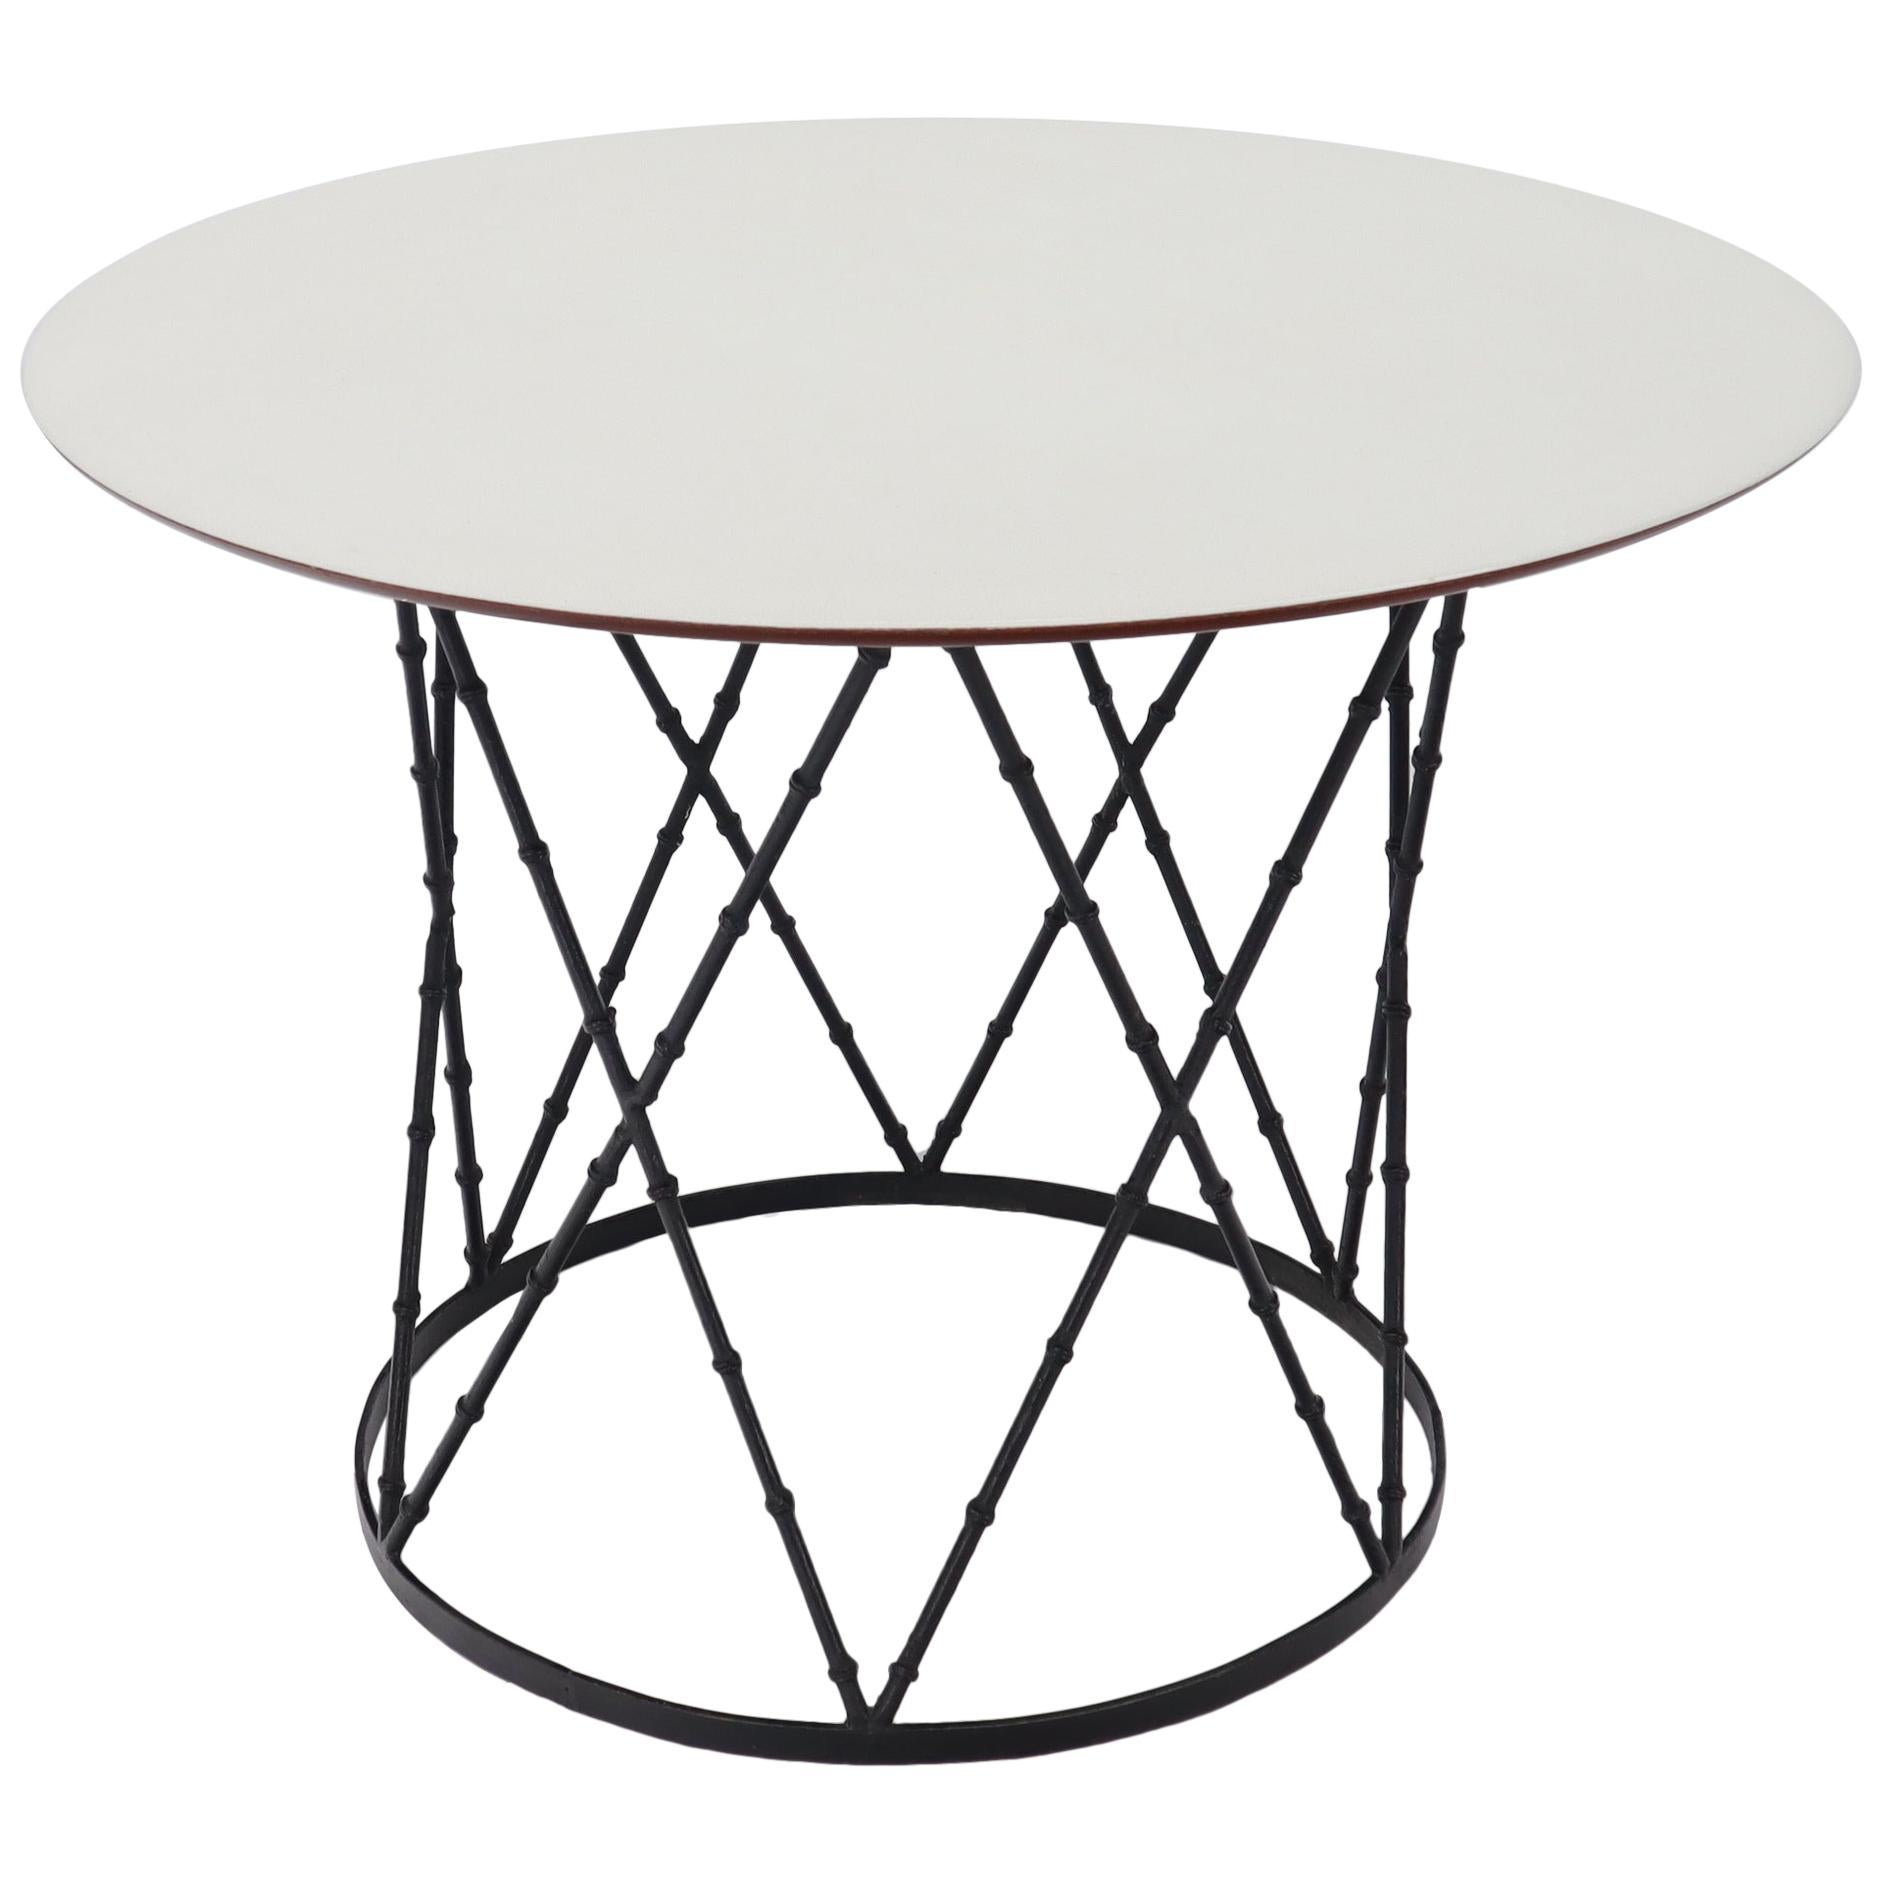 Enameled Top Faux Bamboo Base Mid-Century Modern Dining Dinette Table For Sale